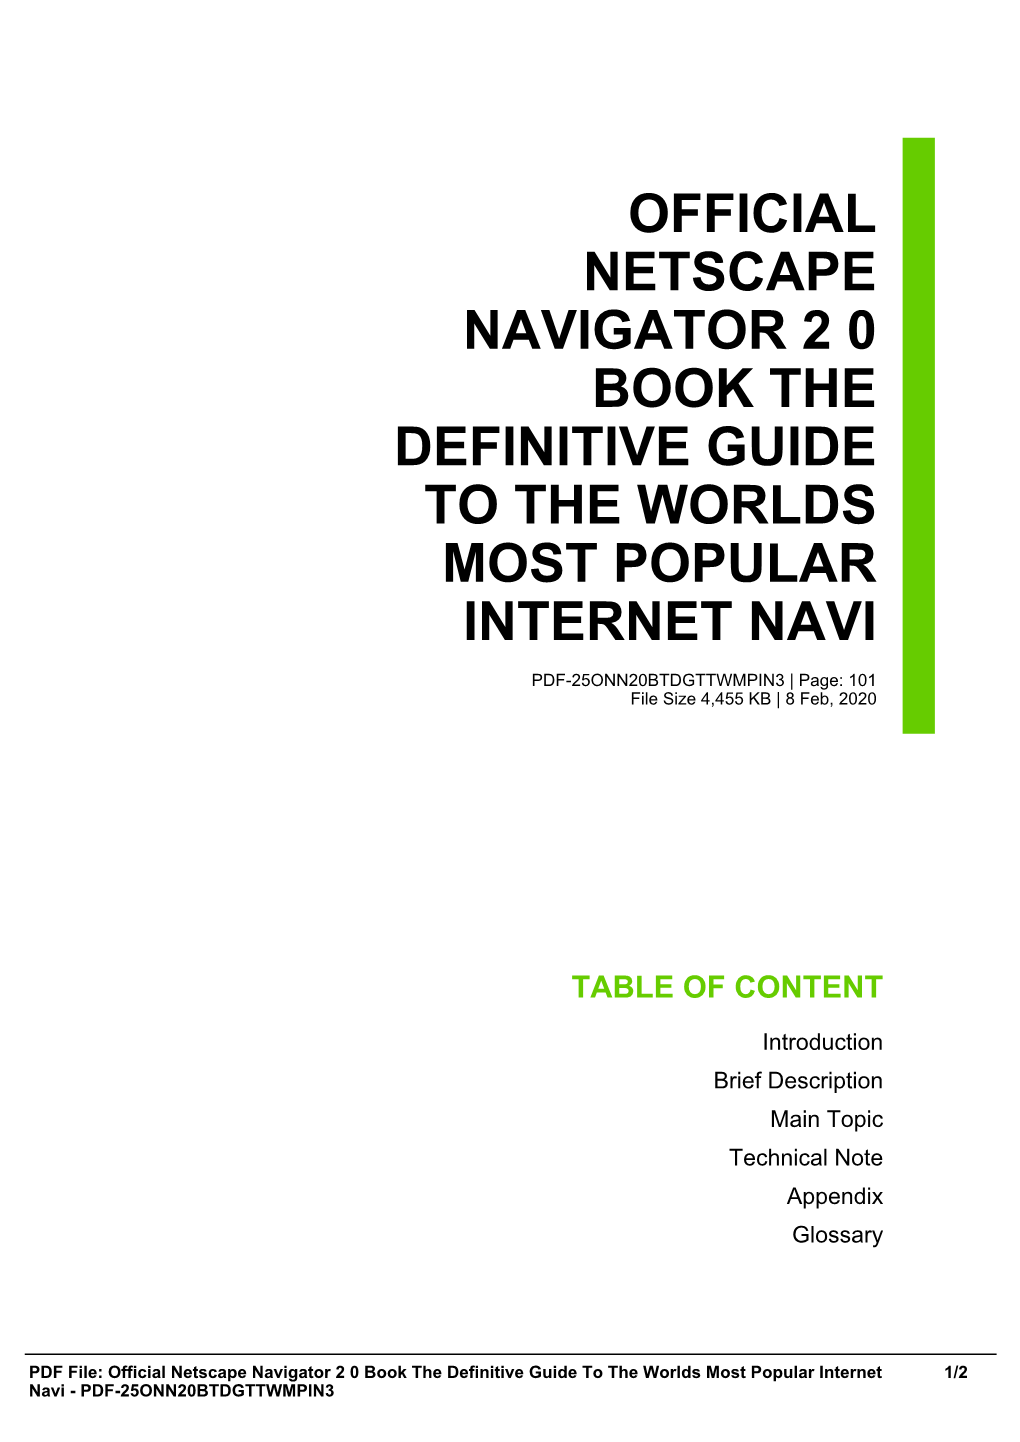 Official Netscape Navigator 2 0 Book the Definitive Guide to the Worlds Most Popular Internet Navi